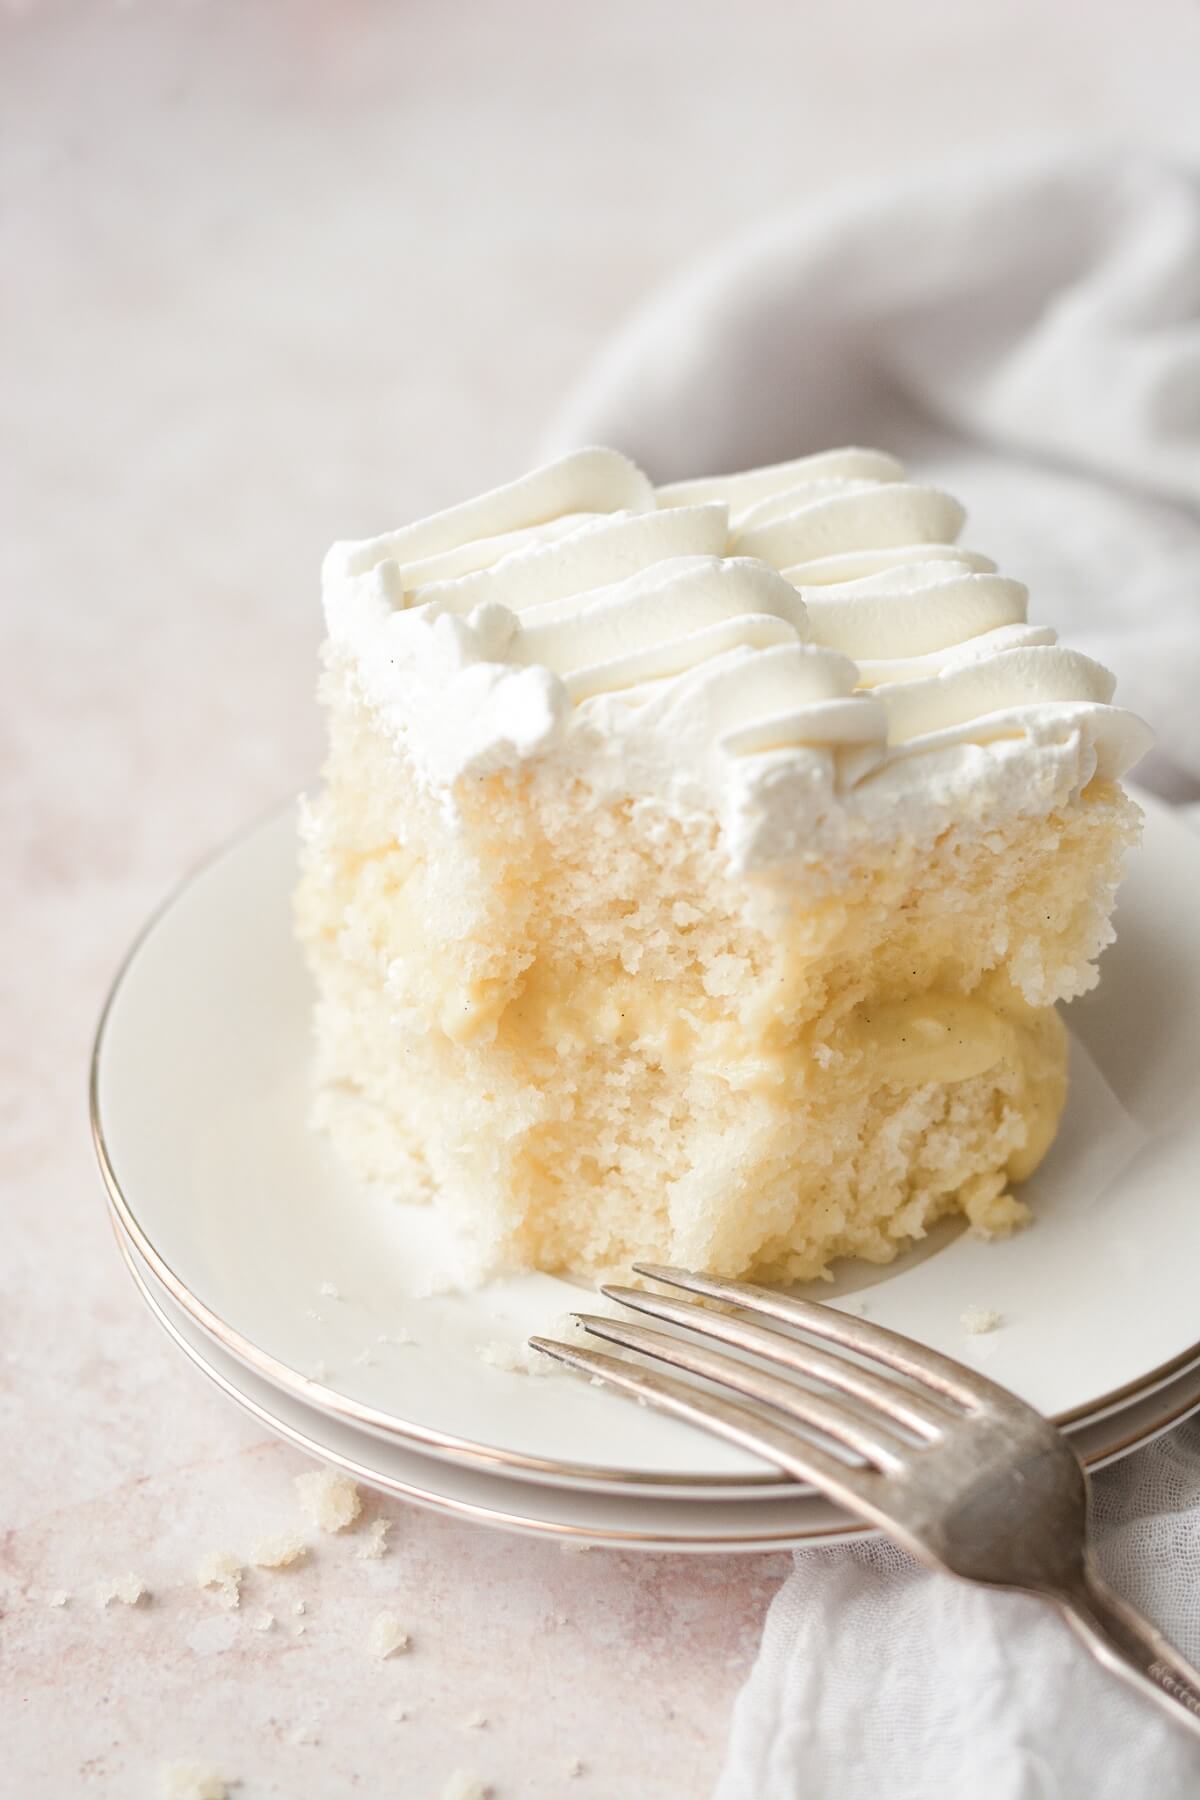 A slice of banana pudding cake with a bite taken.